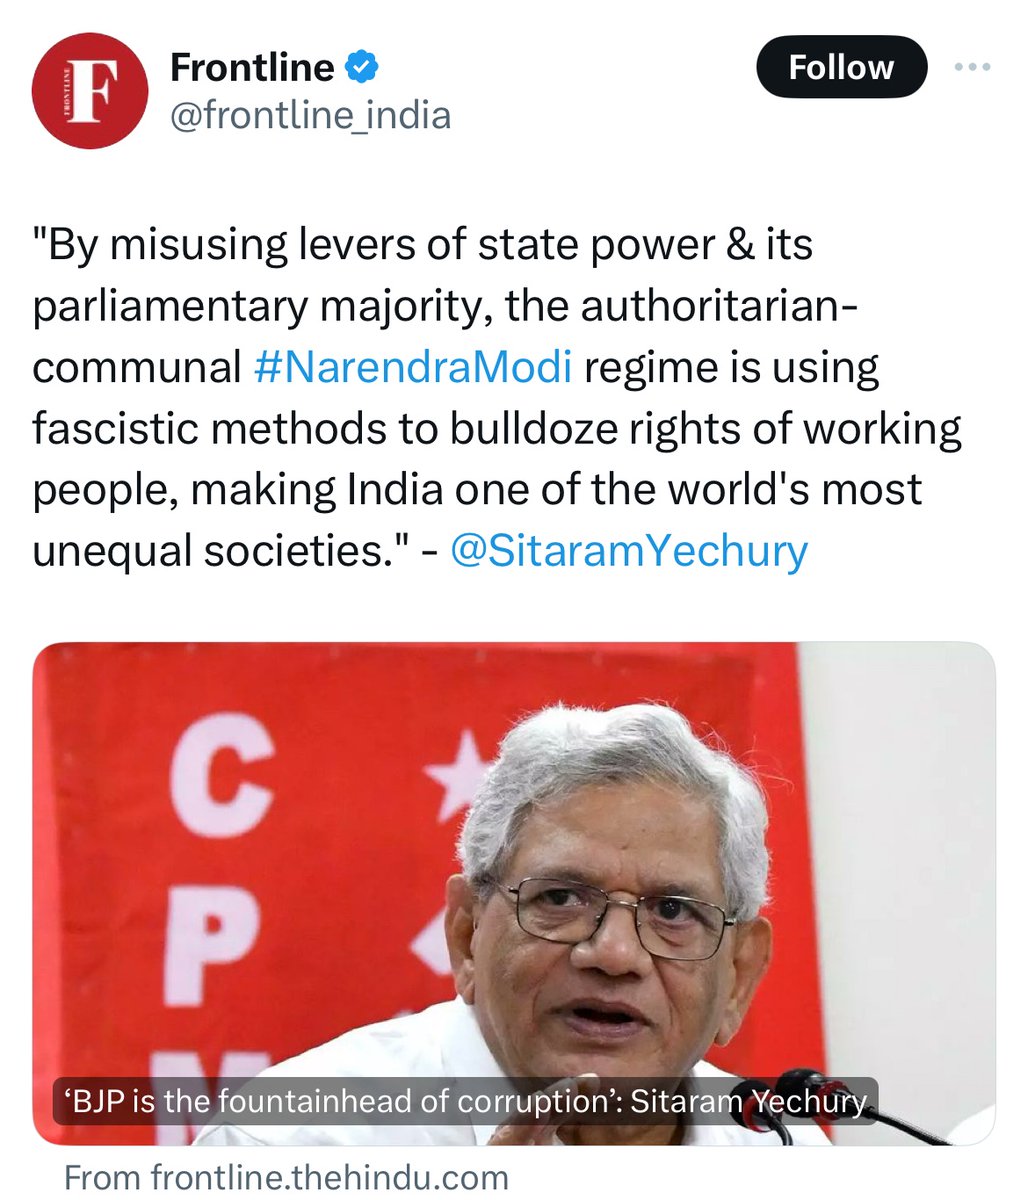 “We should make no mistake about it: the Lok Sabha election is about saving India, against the effort of the BJP to transform the secular, democratic character of the republic into a rabidly intolerant, hate- and violence- based authoritarian and fascistic Hindutva rashtra.”